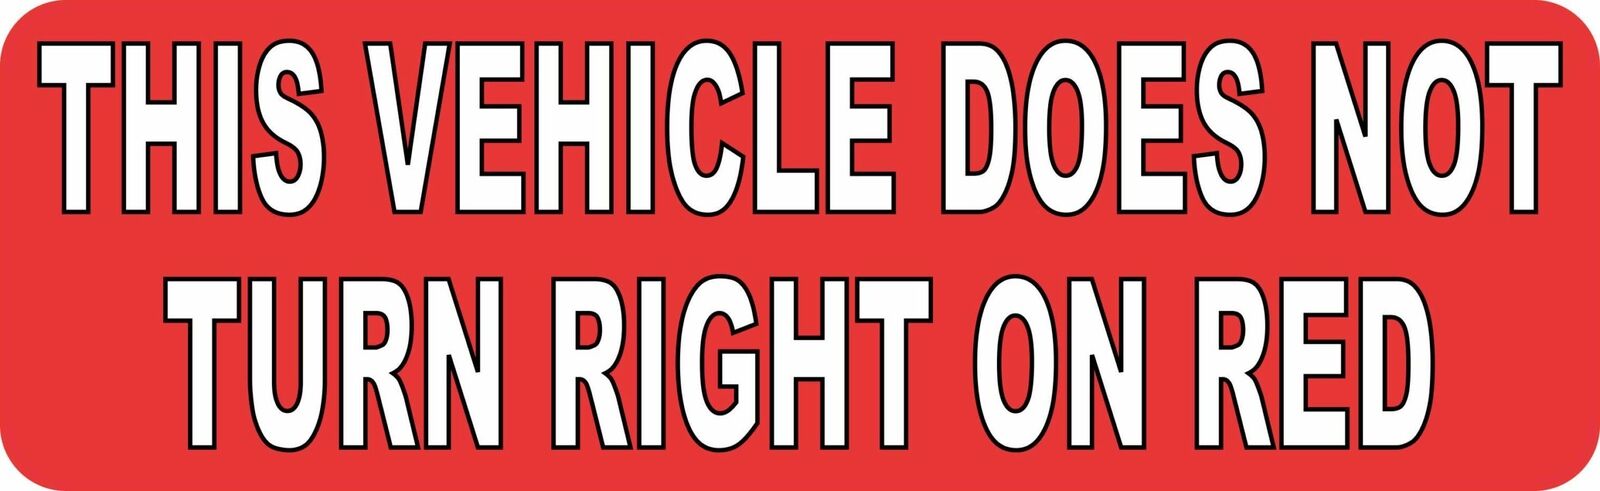 10in x 3in This Vehicle Does Not Turn Right on Red Magnet Car Magnetic Sign